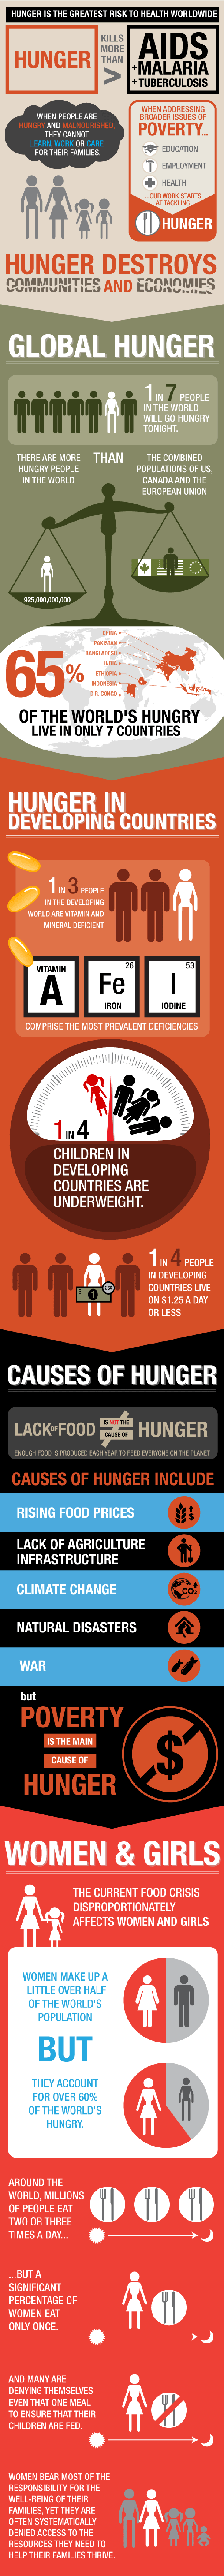 Hunger Is The Greatest Risk To Health Worldwide | CauseTech